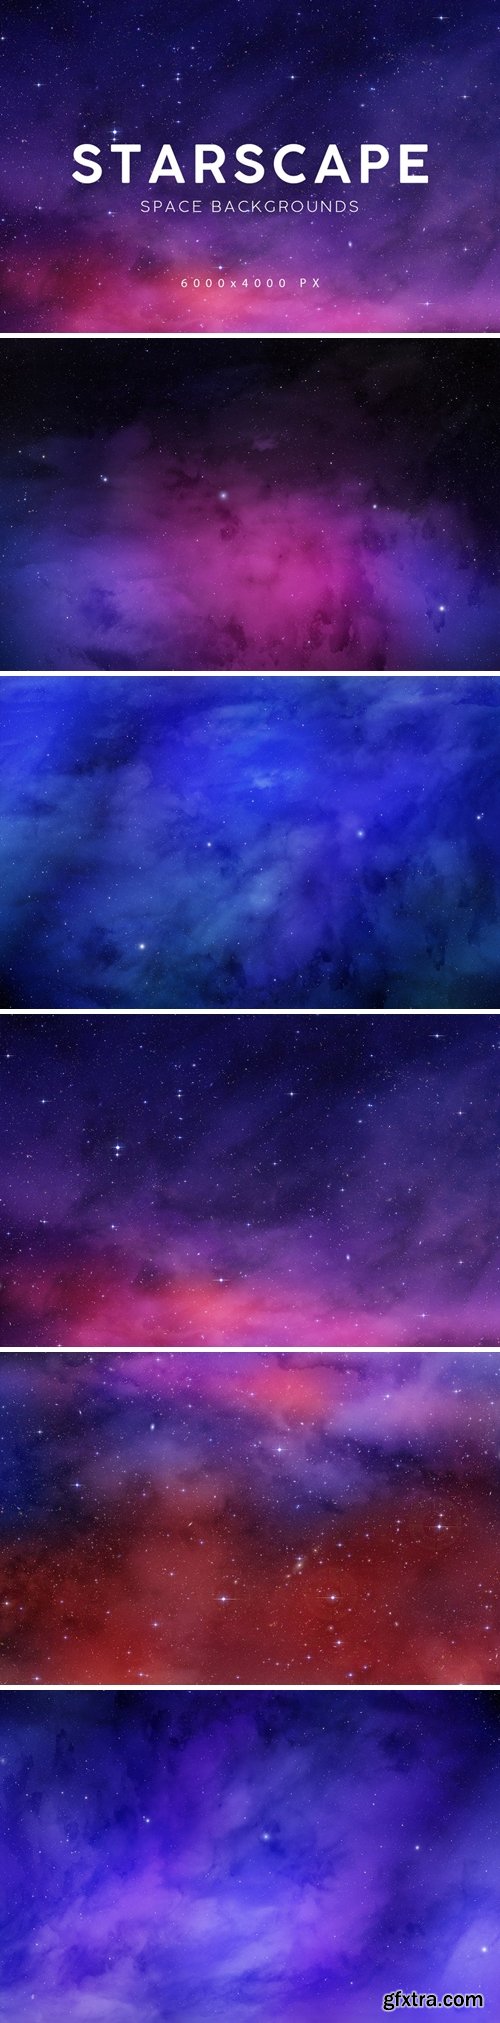 Space Starscape Backgrounds 2